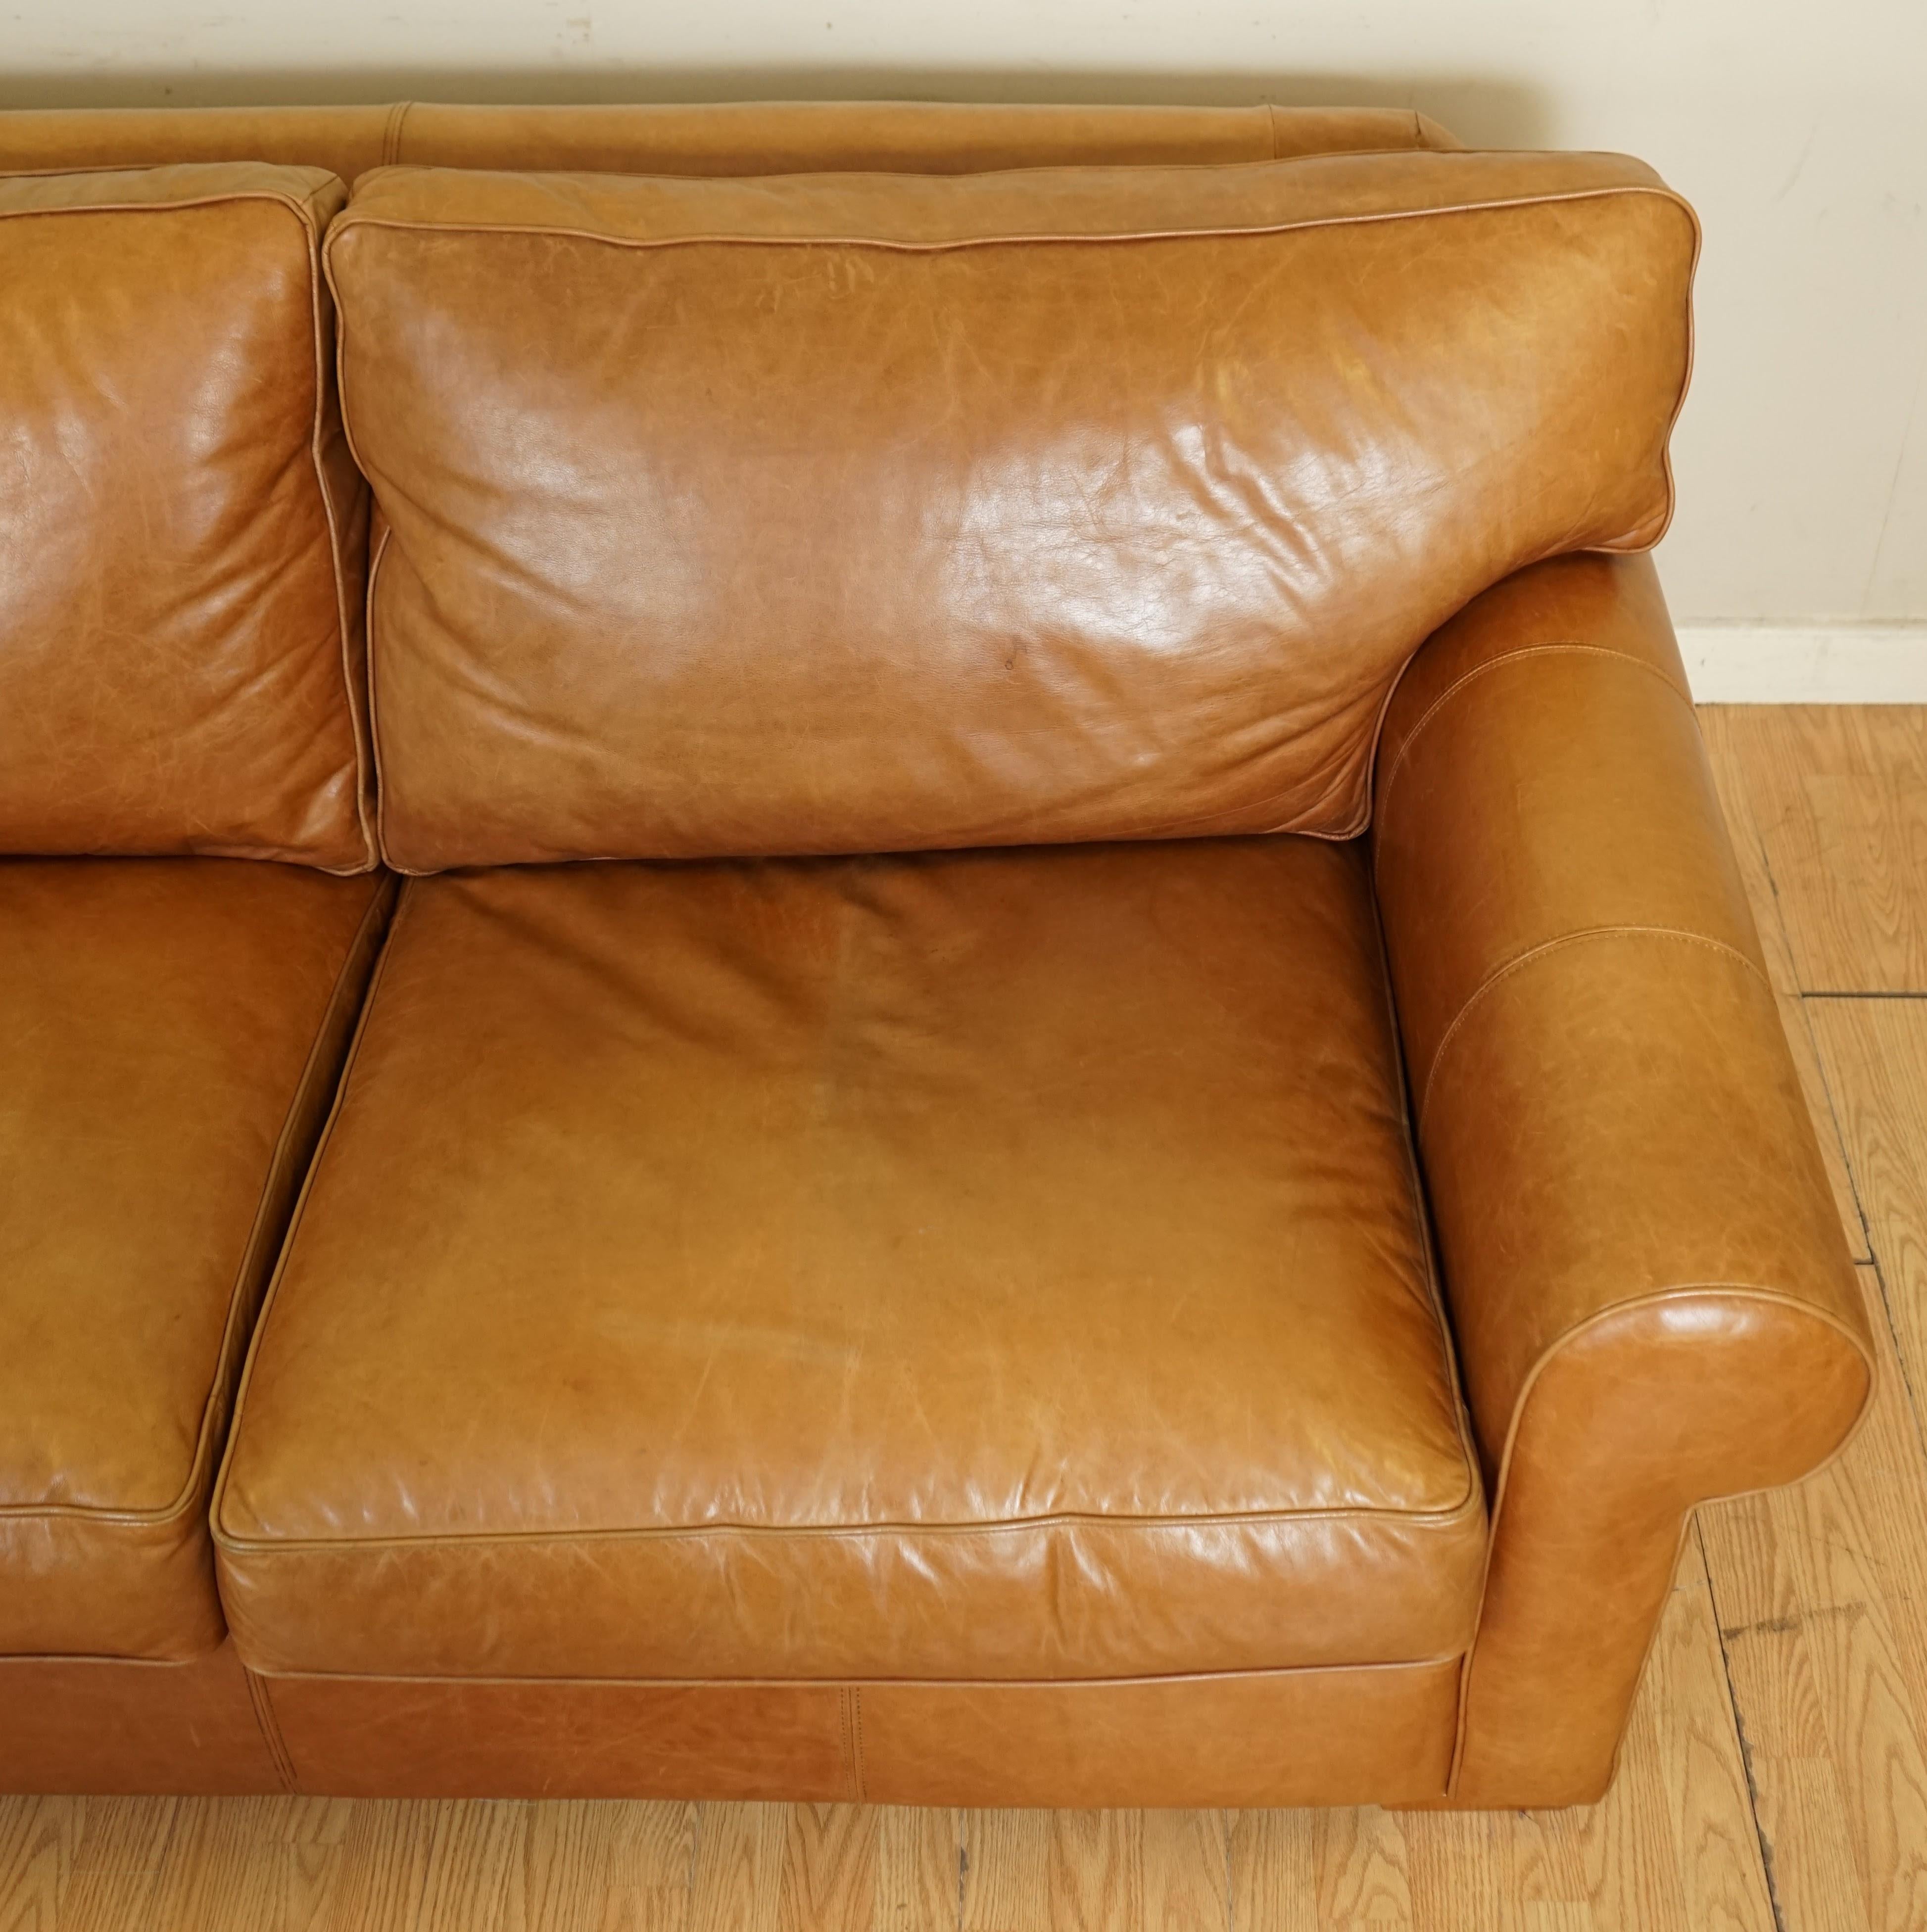 Sumptuous Multiyork Buttery Soft Tan Leather Two Three Seater Sofa 1